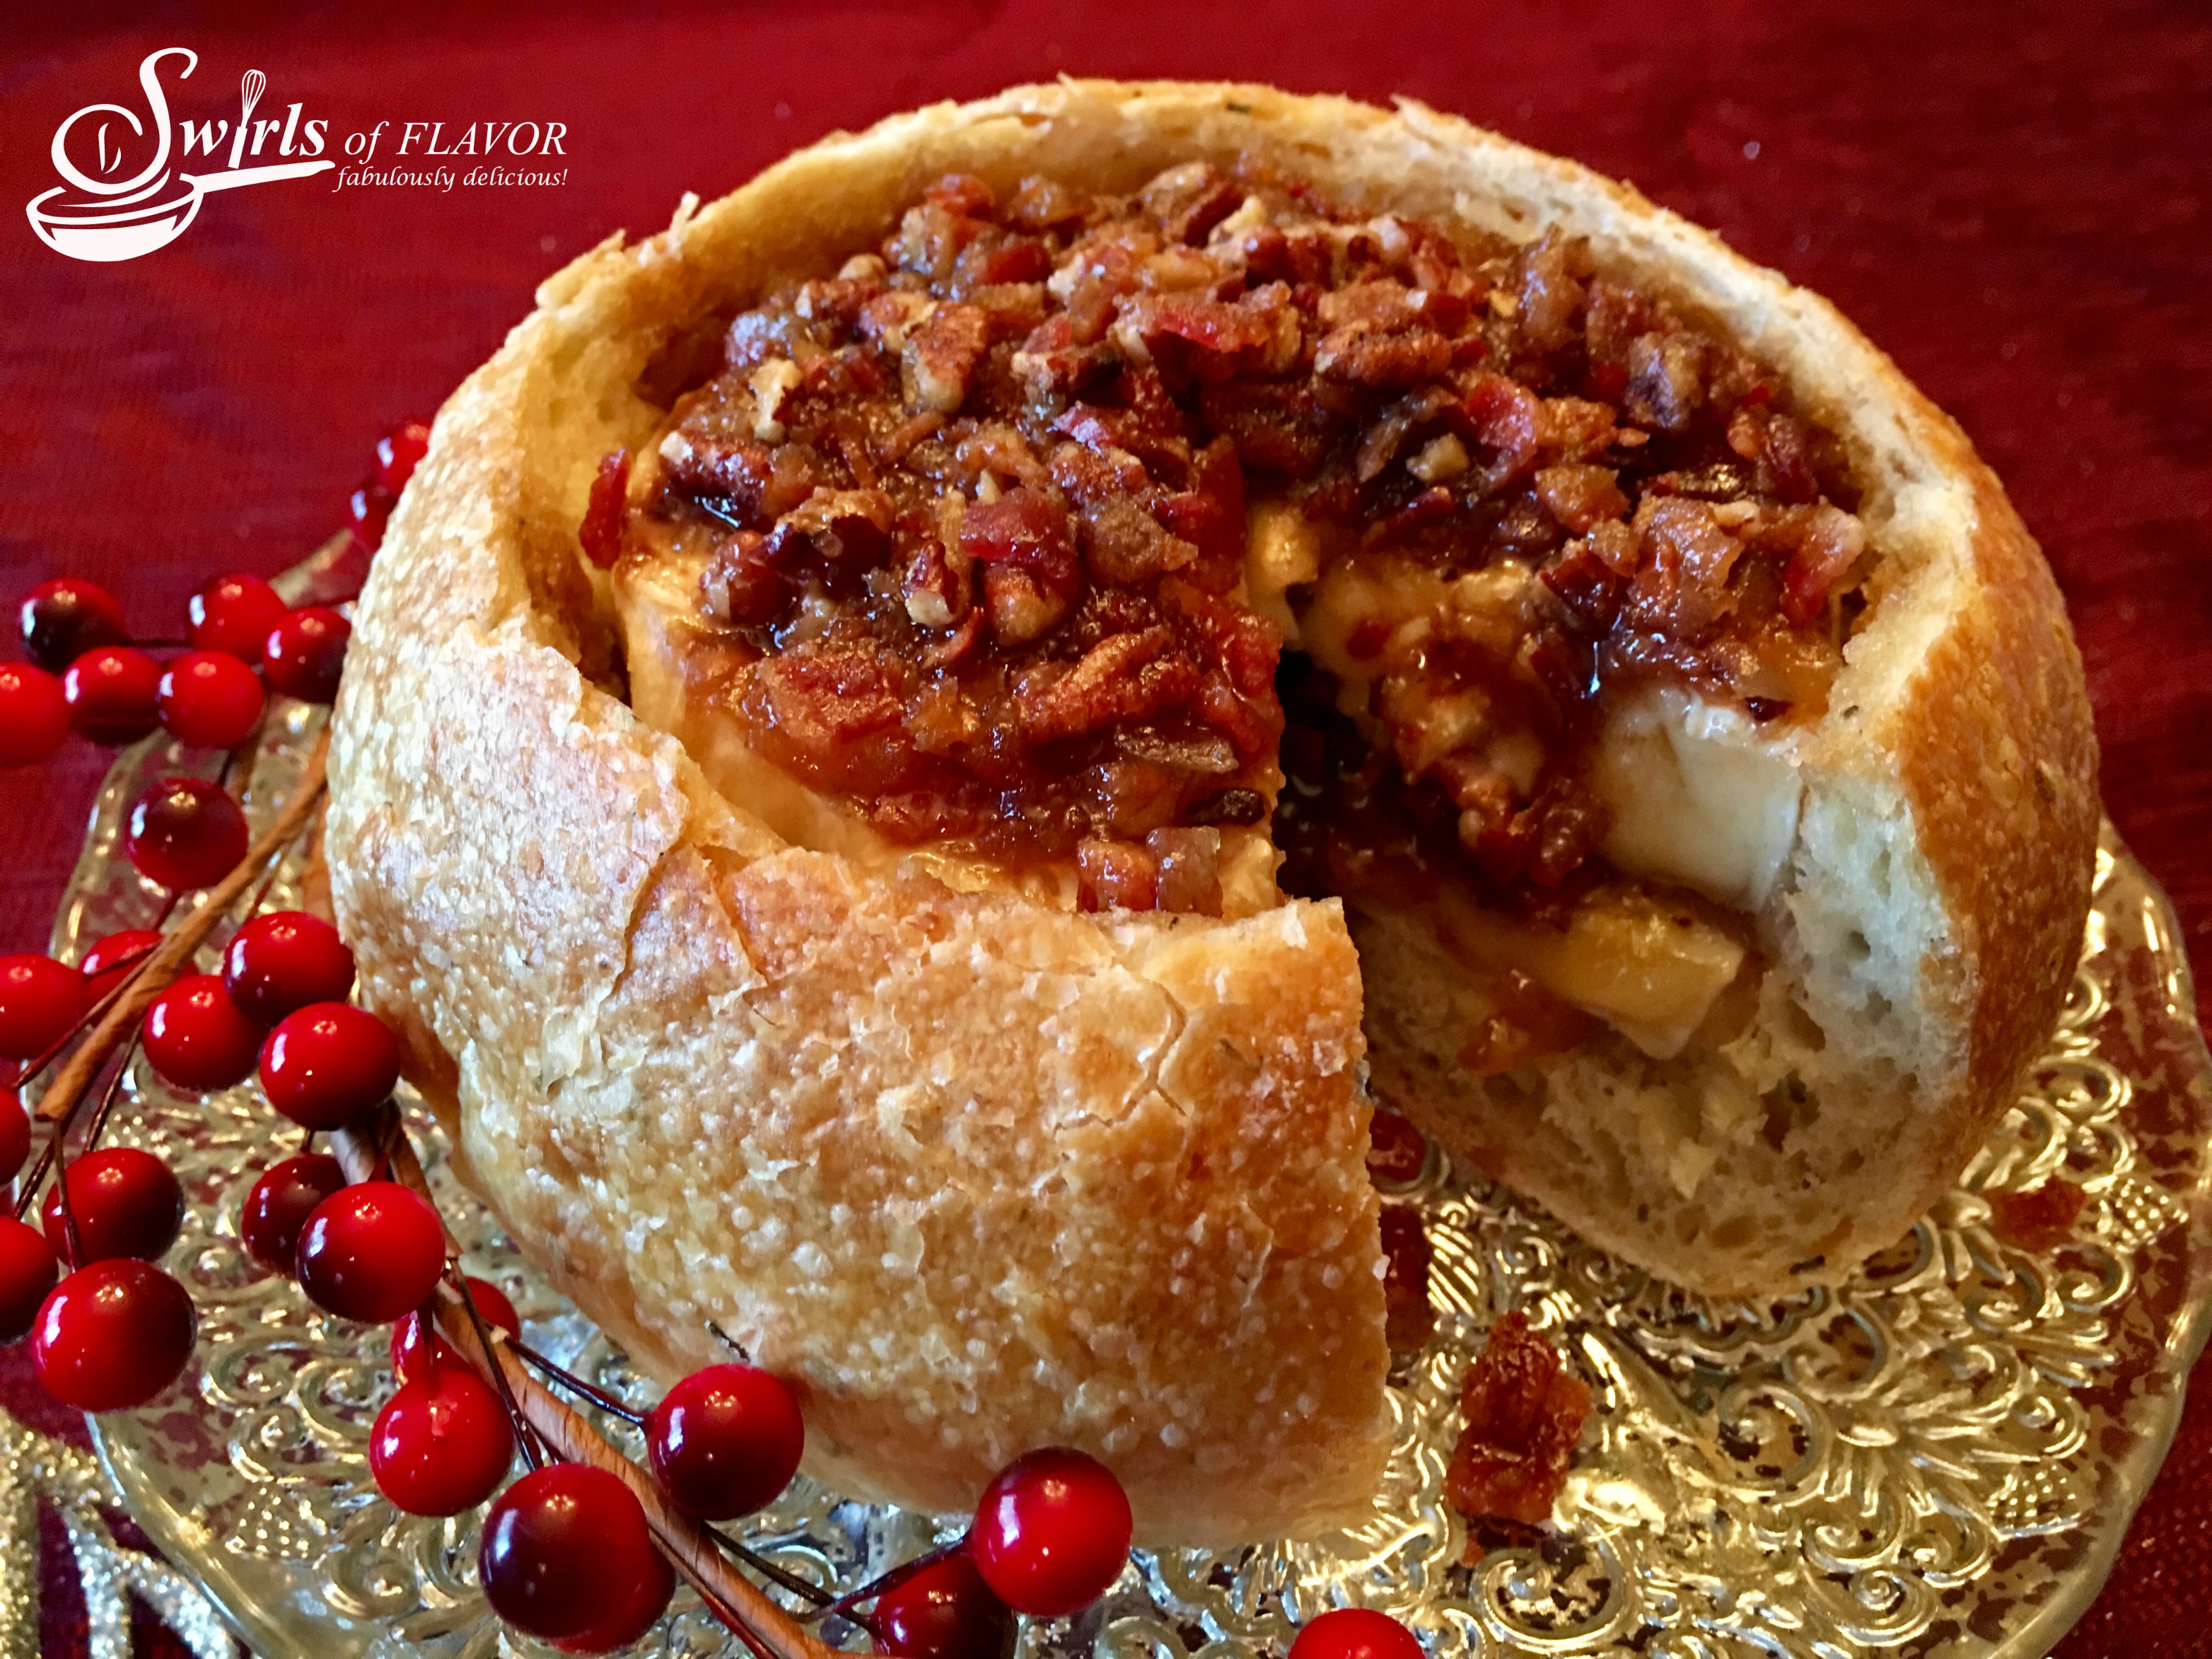 Brandied Bacon Baked Brie is a sweet and savory mixture of bacon, pecans, brown sugar, maple syrup and Brandy combined with a layer of bacon jam on a Brie cheese wheel that's nestled in a crusty bread bowl and baked into divine creaminess!